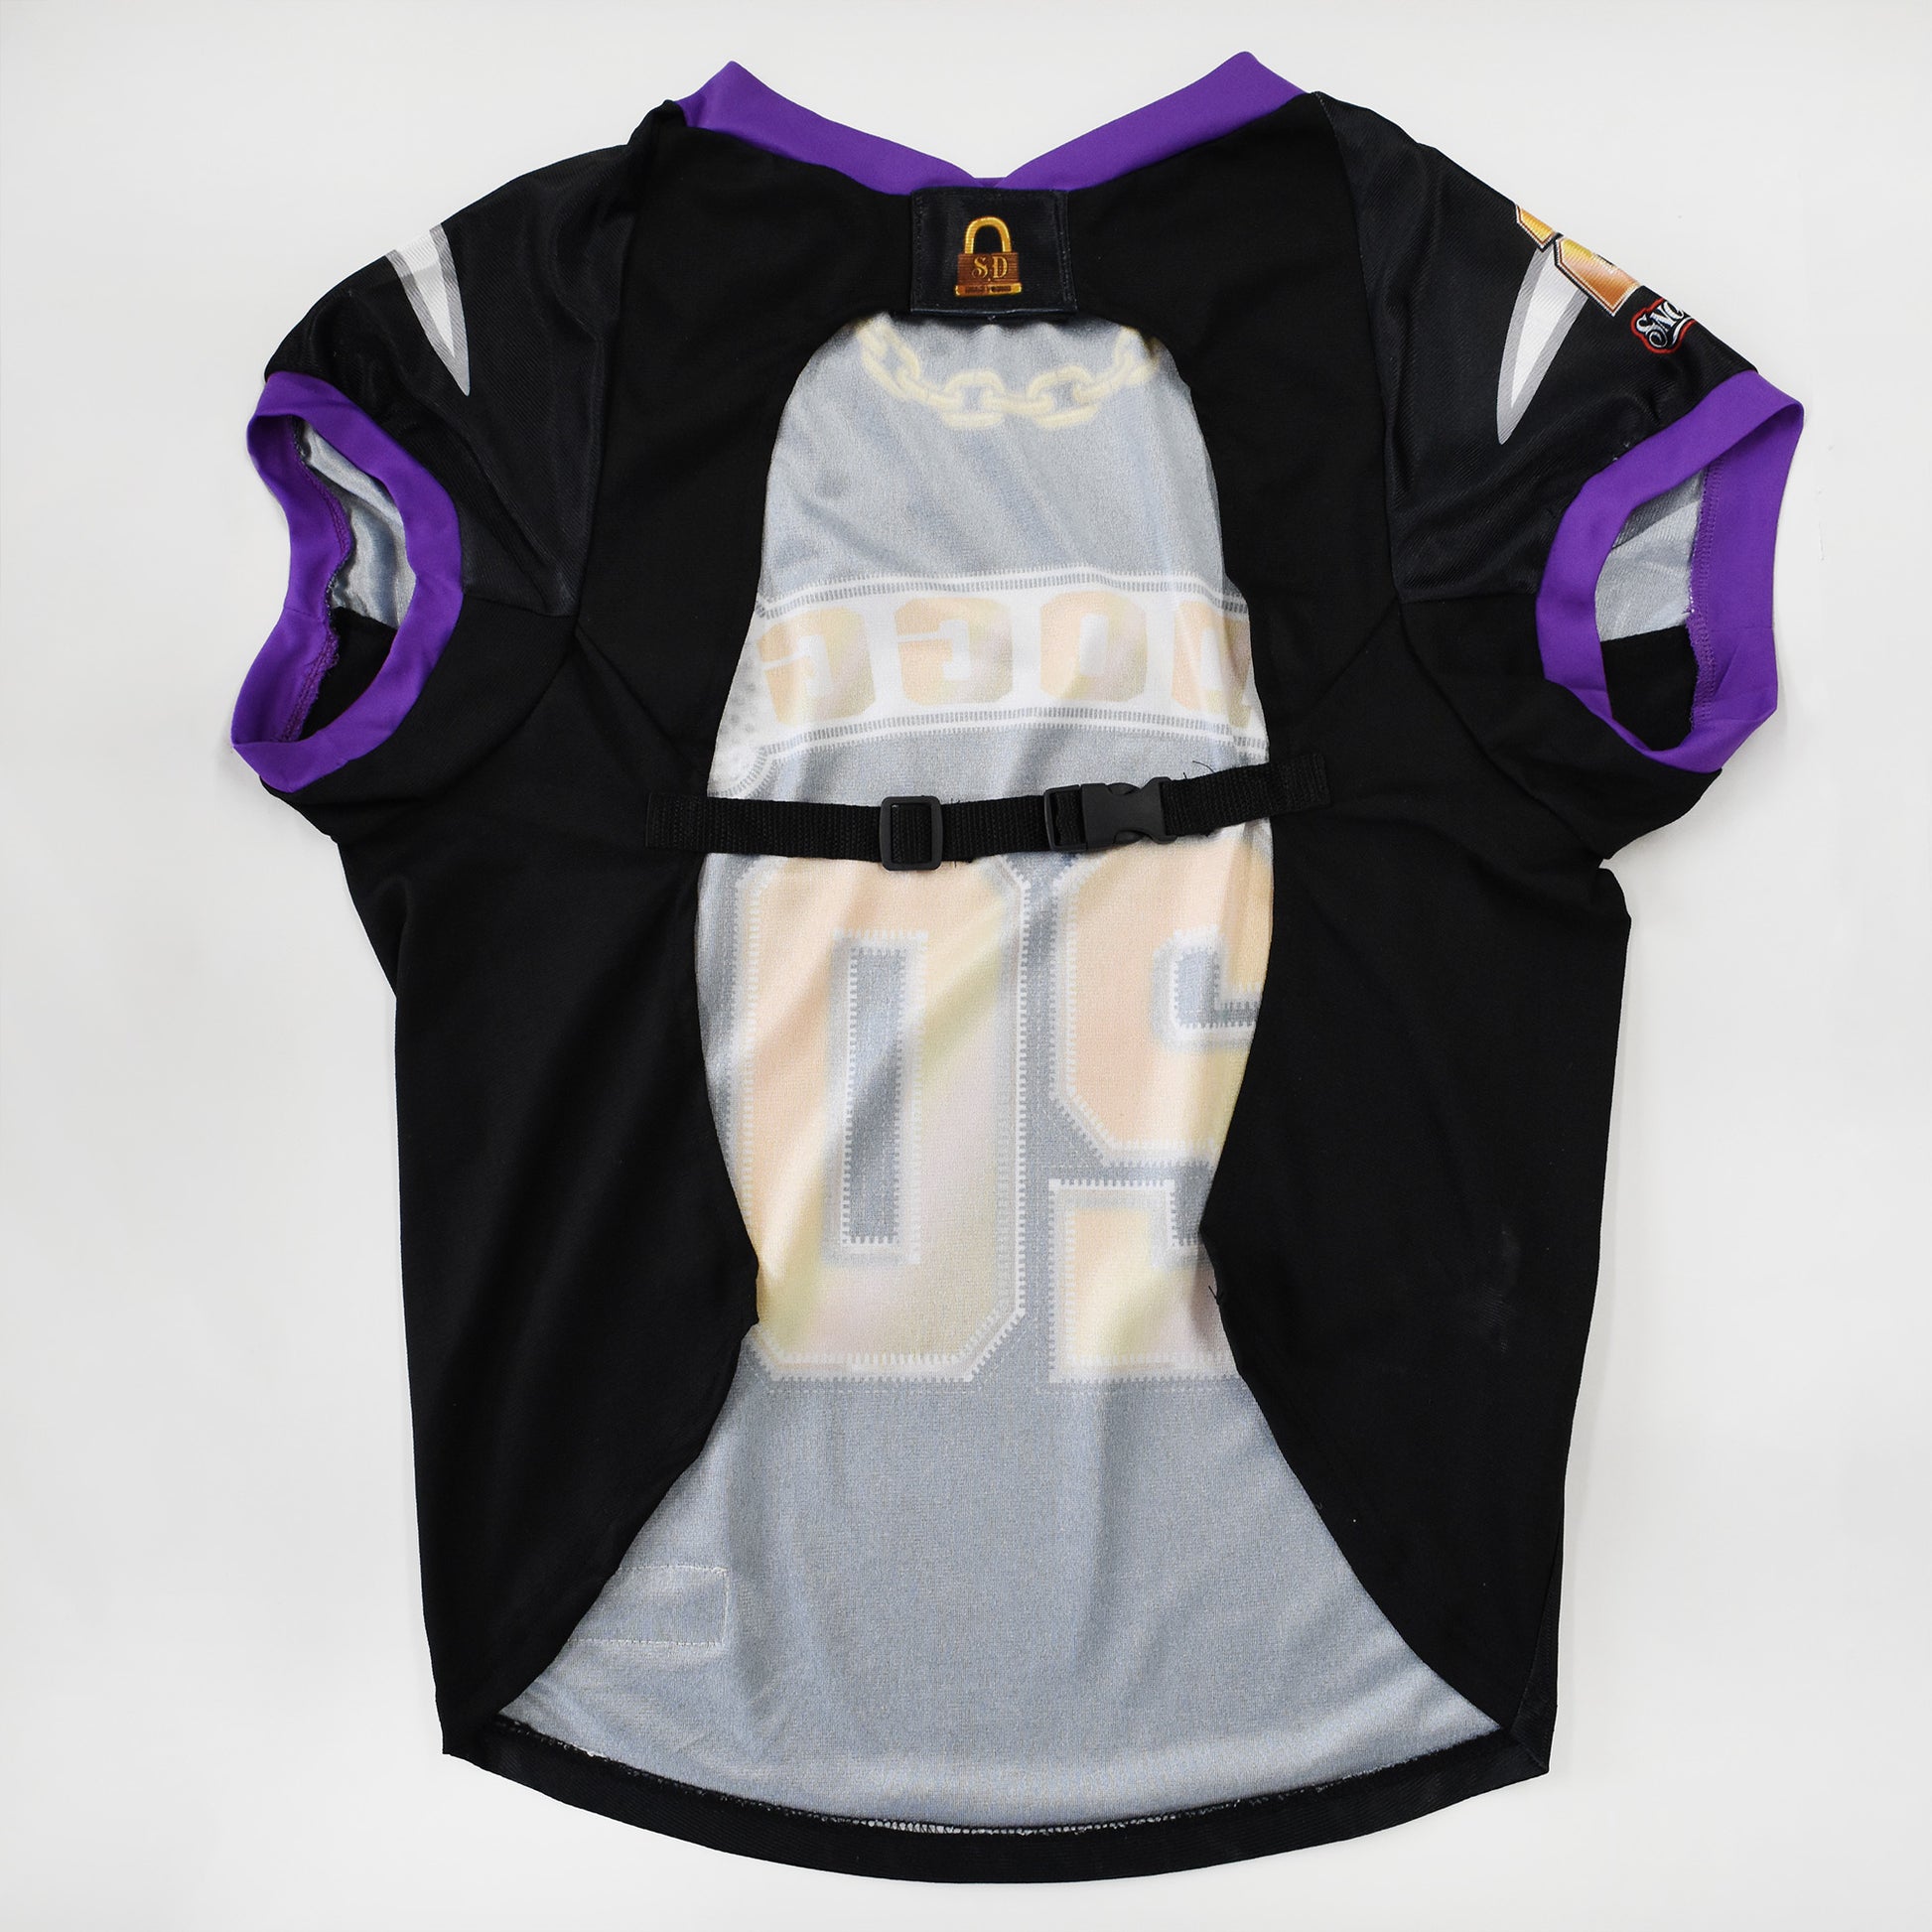 Product flat lay of the Off The Chain Deluxe Pet Jersey with buckle closure.